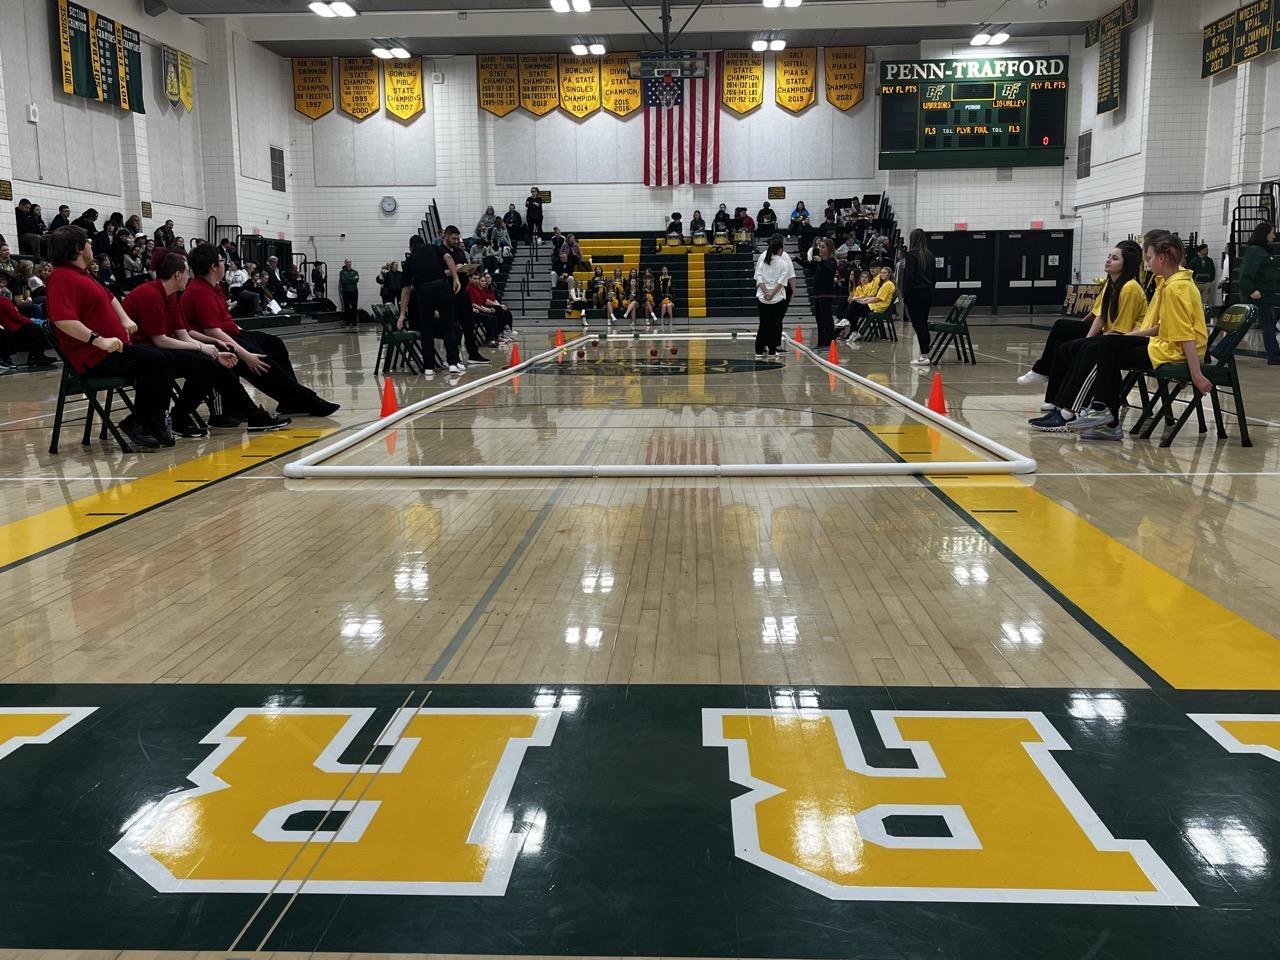 The 12’ x 60’ bocce court was set up in Penn-Trafford’s main gymnasium